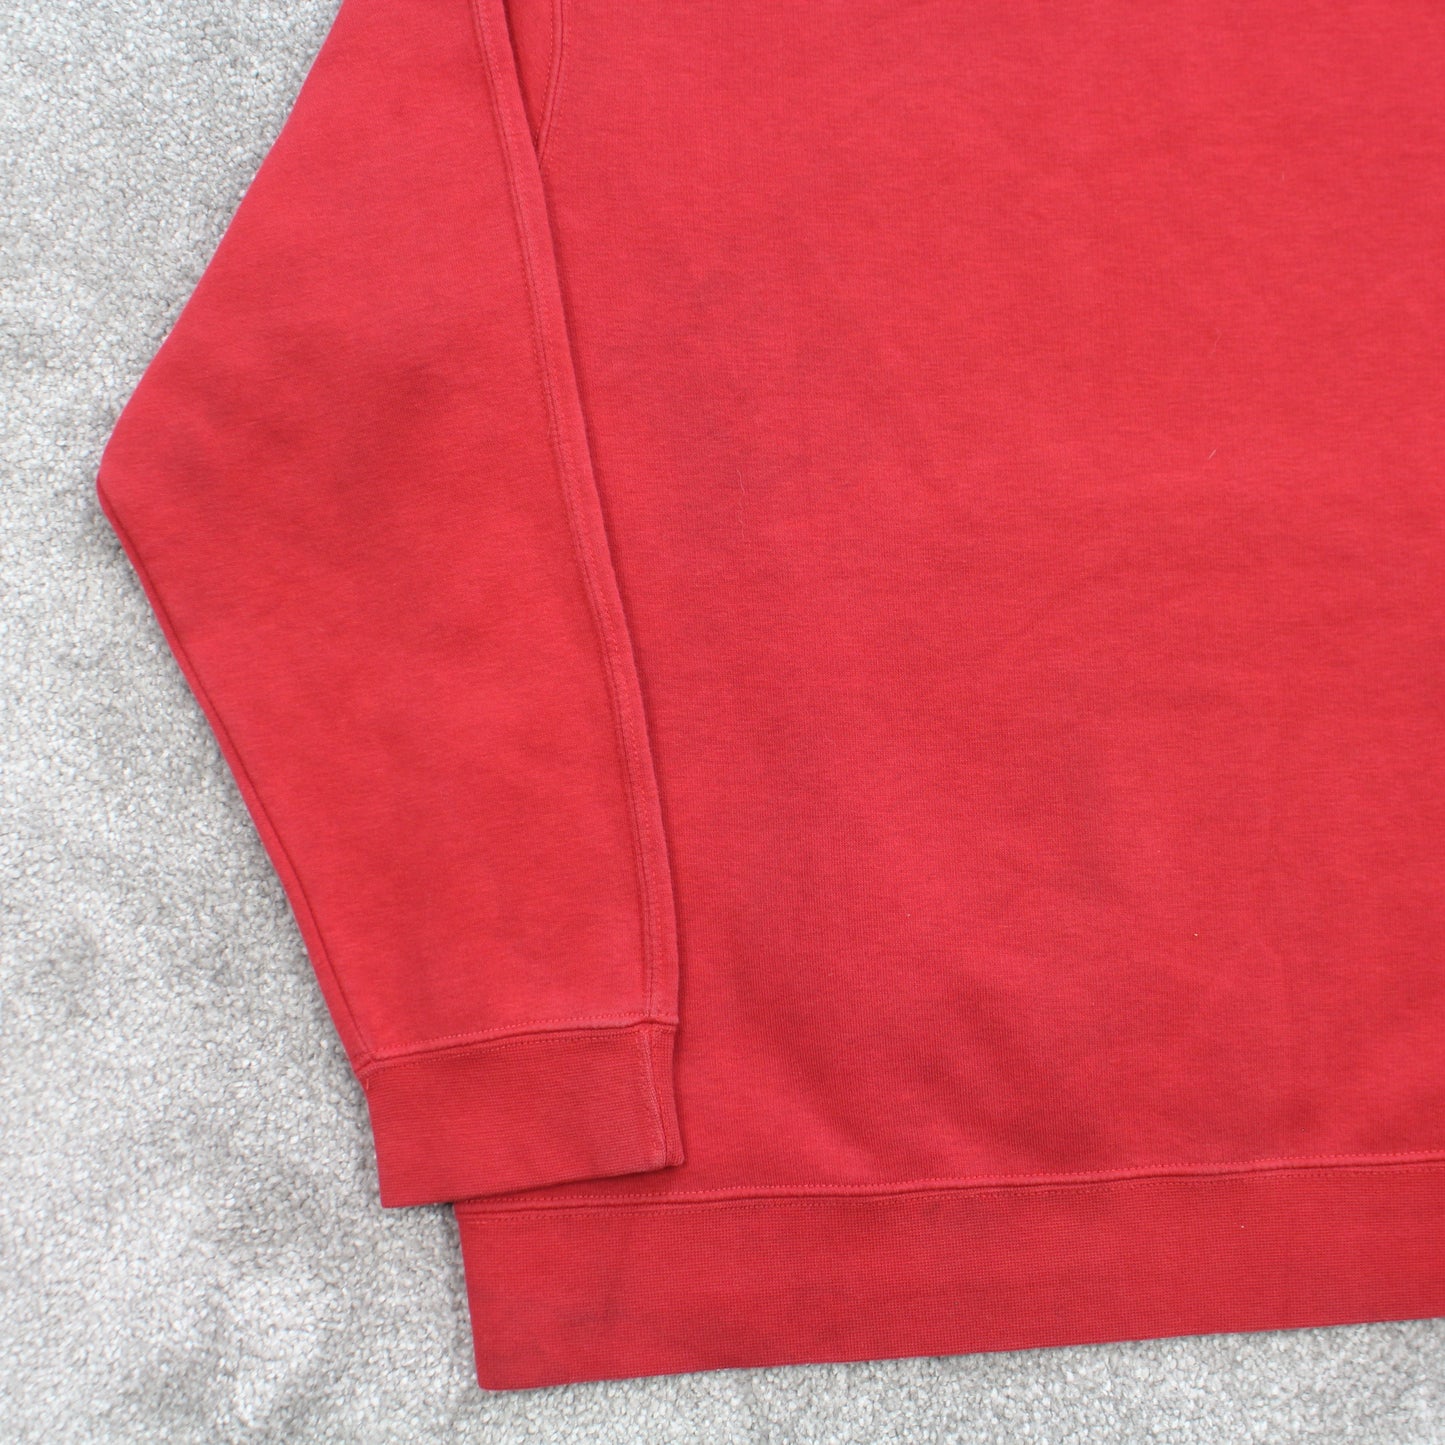 SUPER RARE Vintage 00s Nike Spell Out Hoodie Red - (XS)